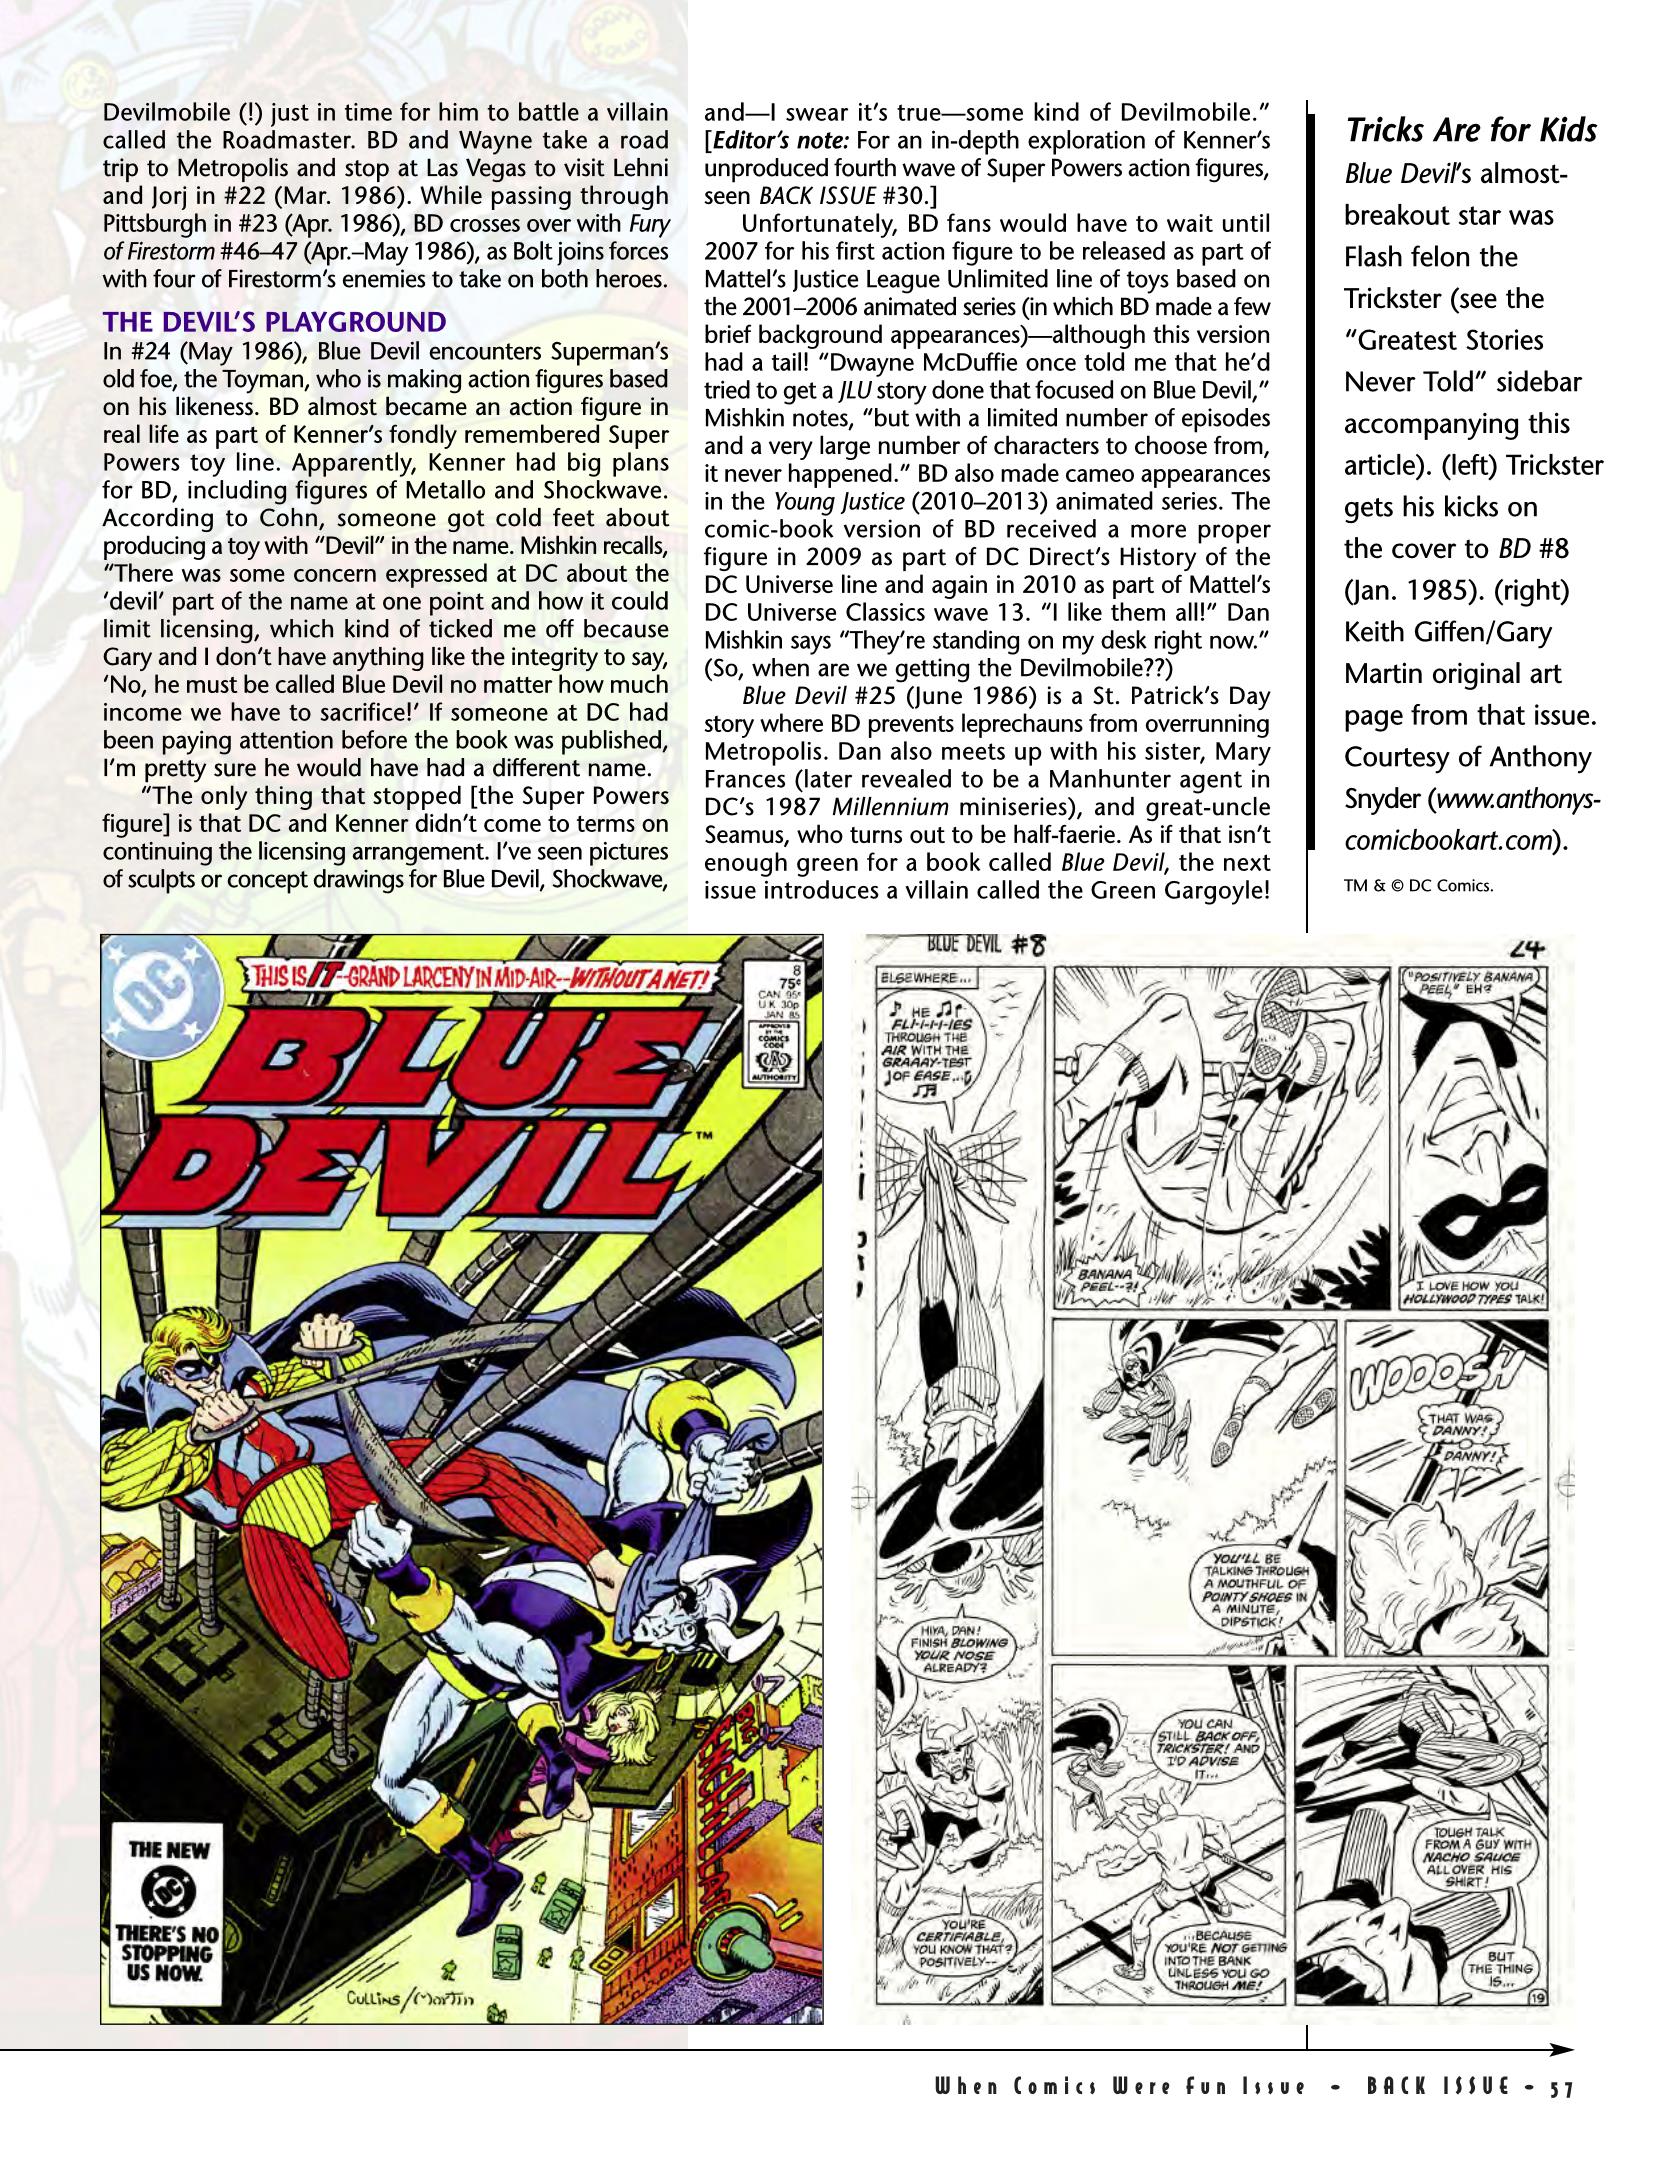 Read online Back Issue comic -  Issue #77 - 55